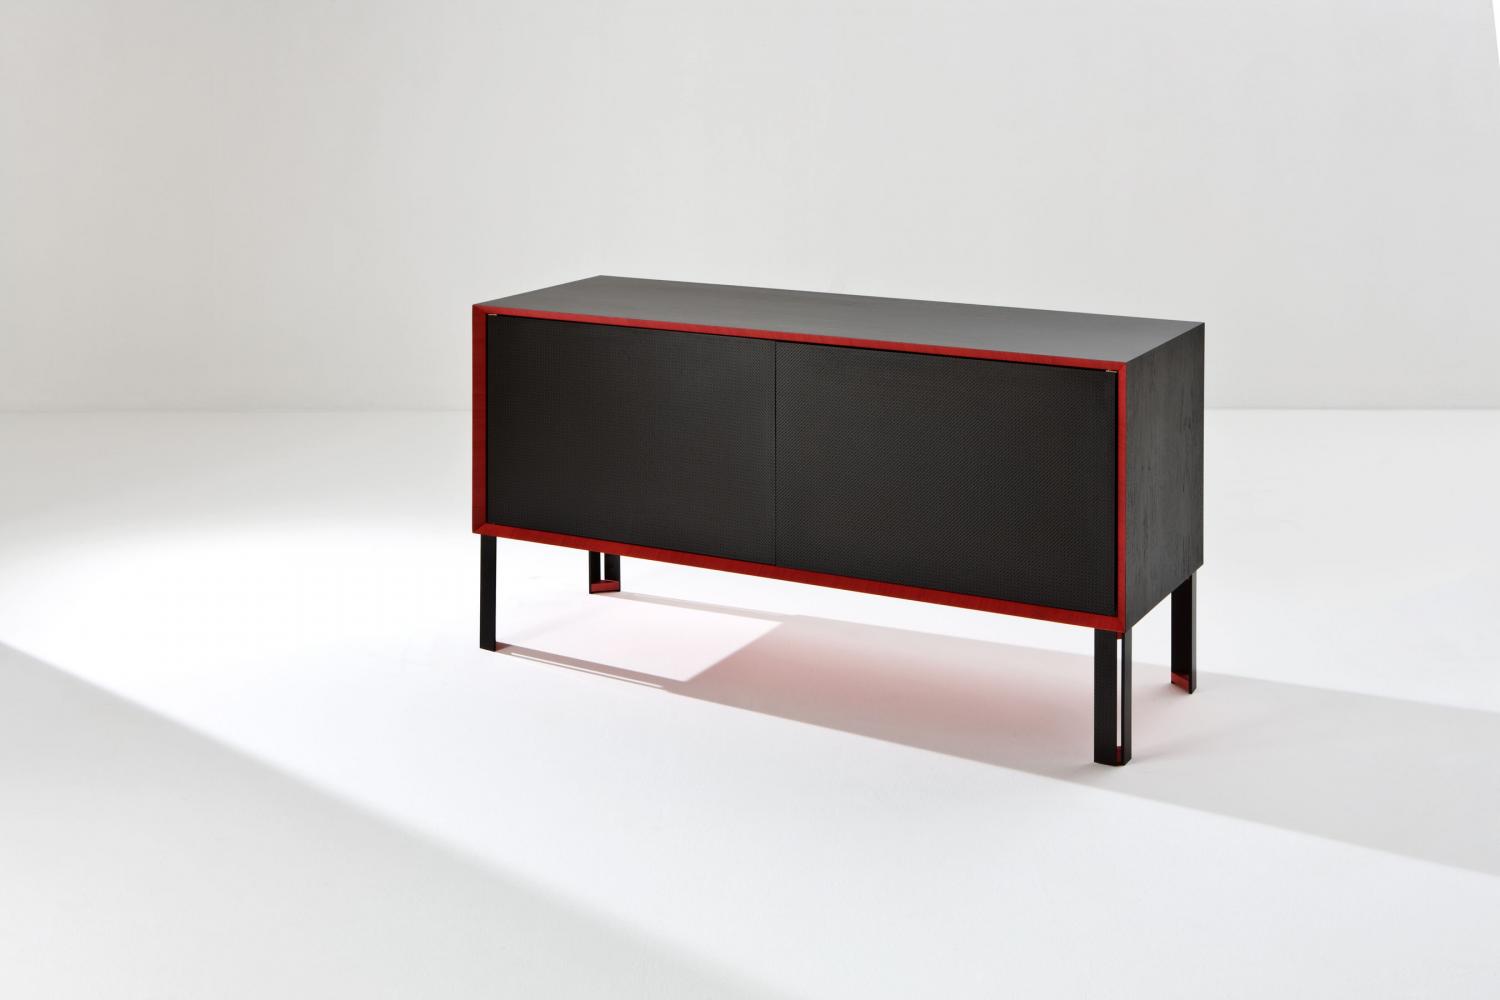 Luxury sideboard designed by Fabrizio Giugiaro handmade in Italy in carbon fiber and StoneOak wood with red frame.